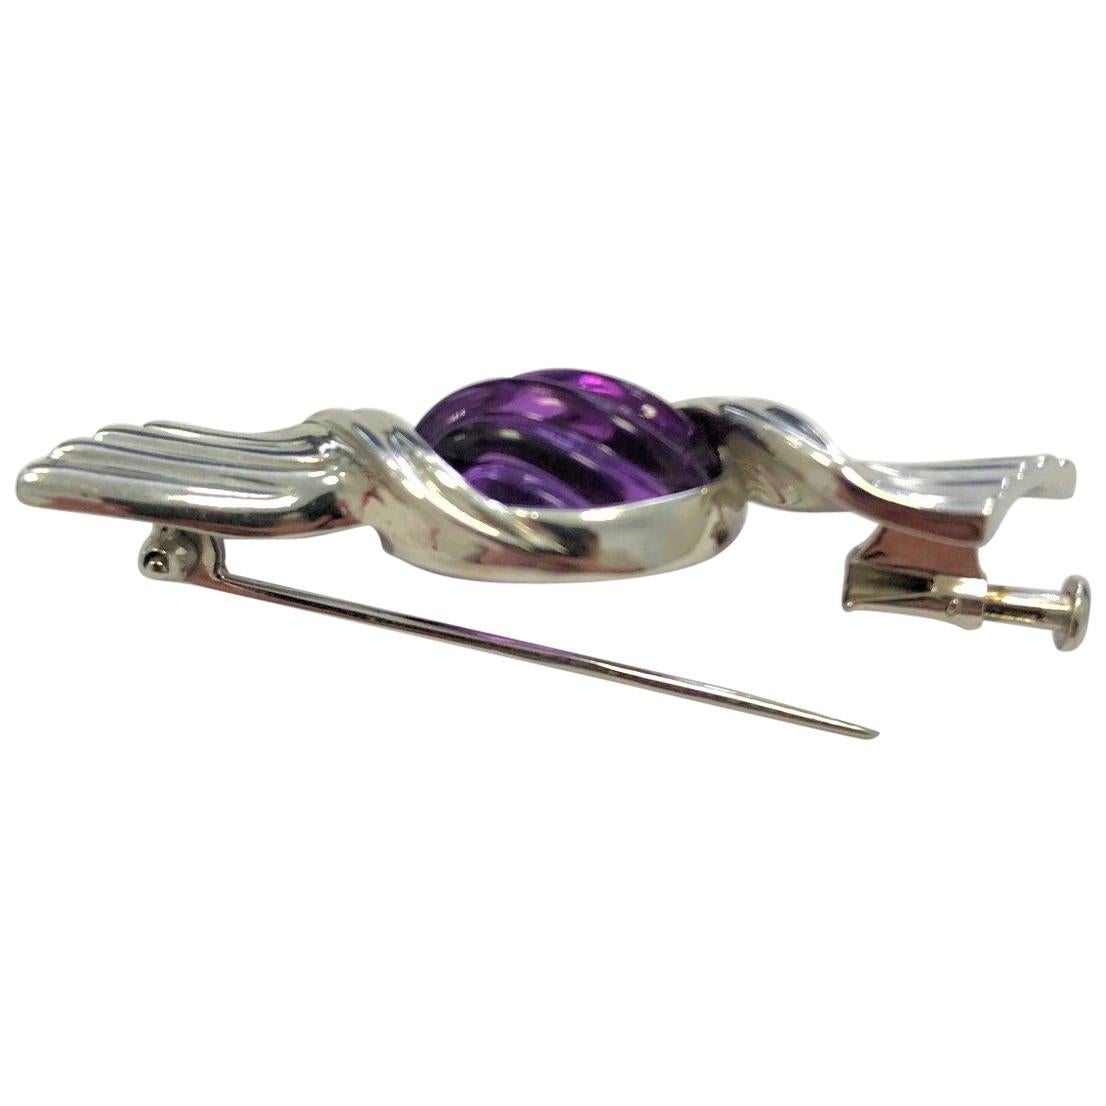 Bulgari 18 Carat White Gold And Amethyst Sweet Wrapper Brooch. Designed as a sweet wrapper with the carved cabochon amethyst between white gold wrapper. Signed 'Bulgari' and '750'. Weighing 10.4 grams and approximately 4.9 centimetres in length.